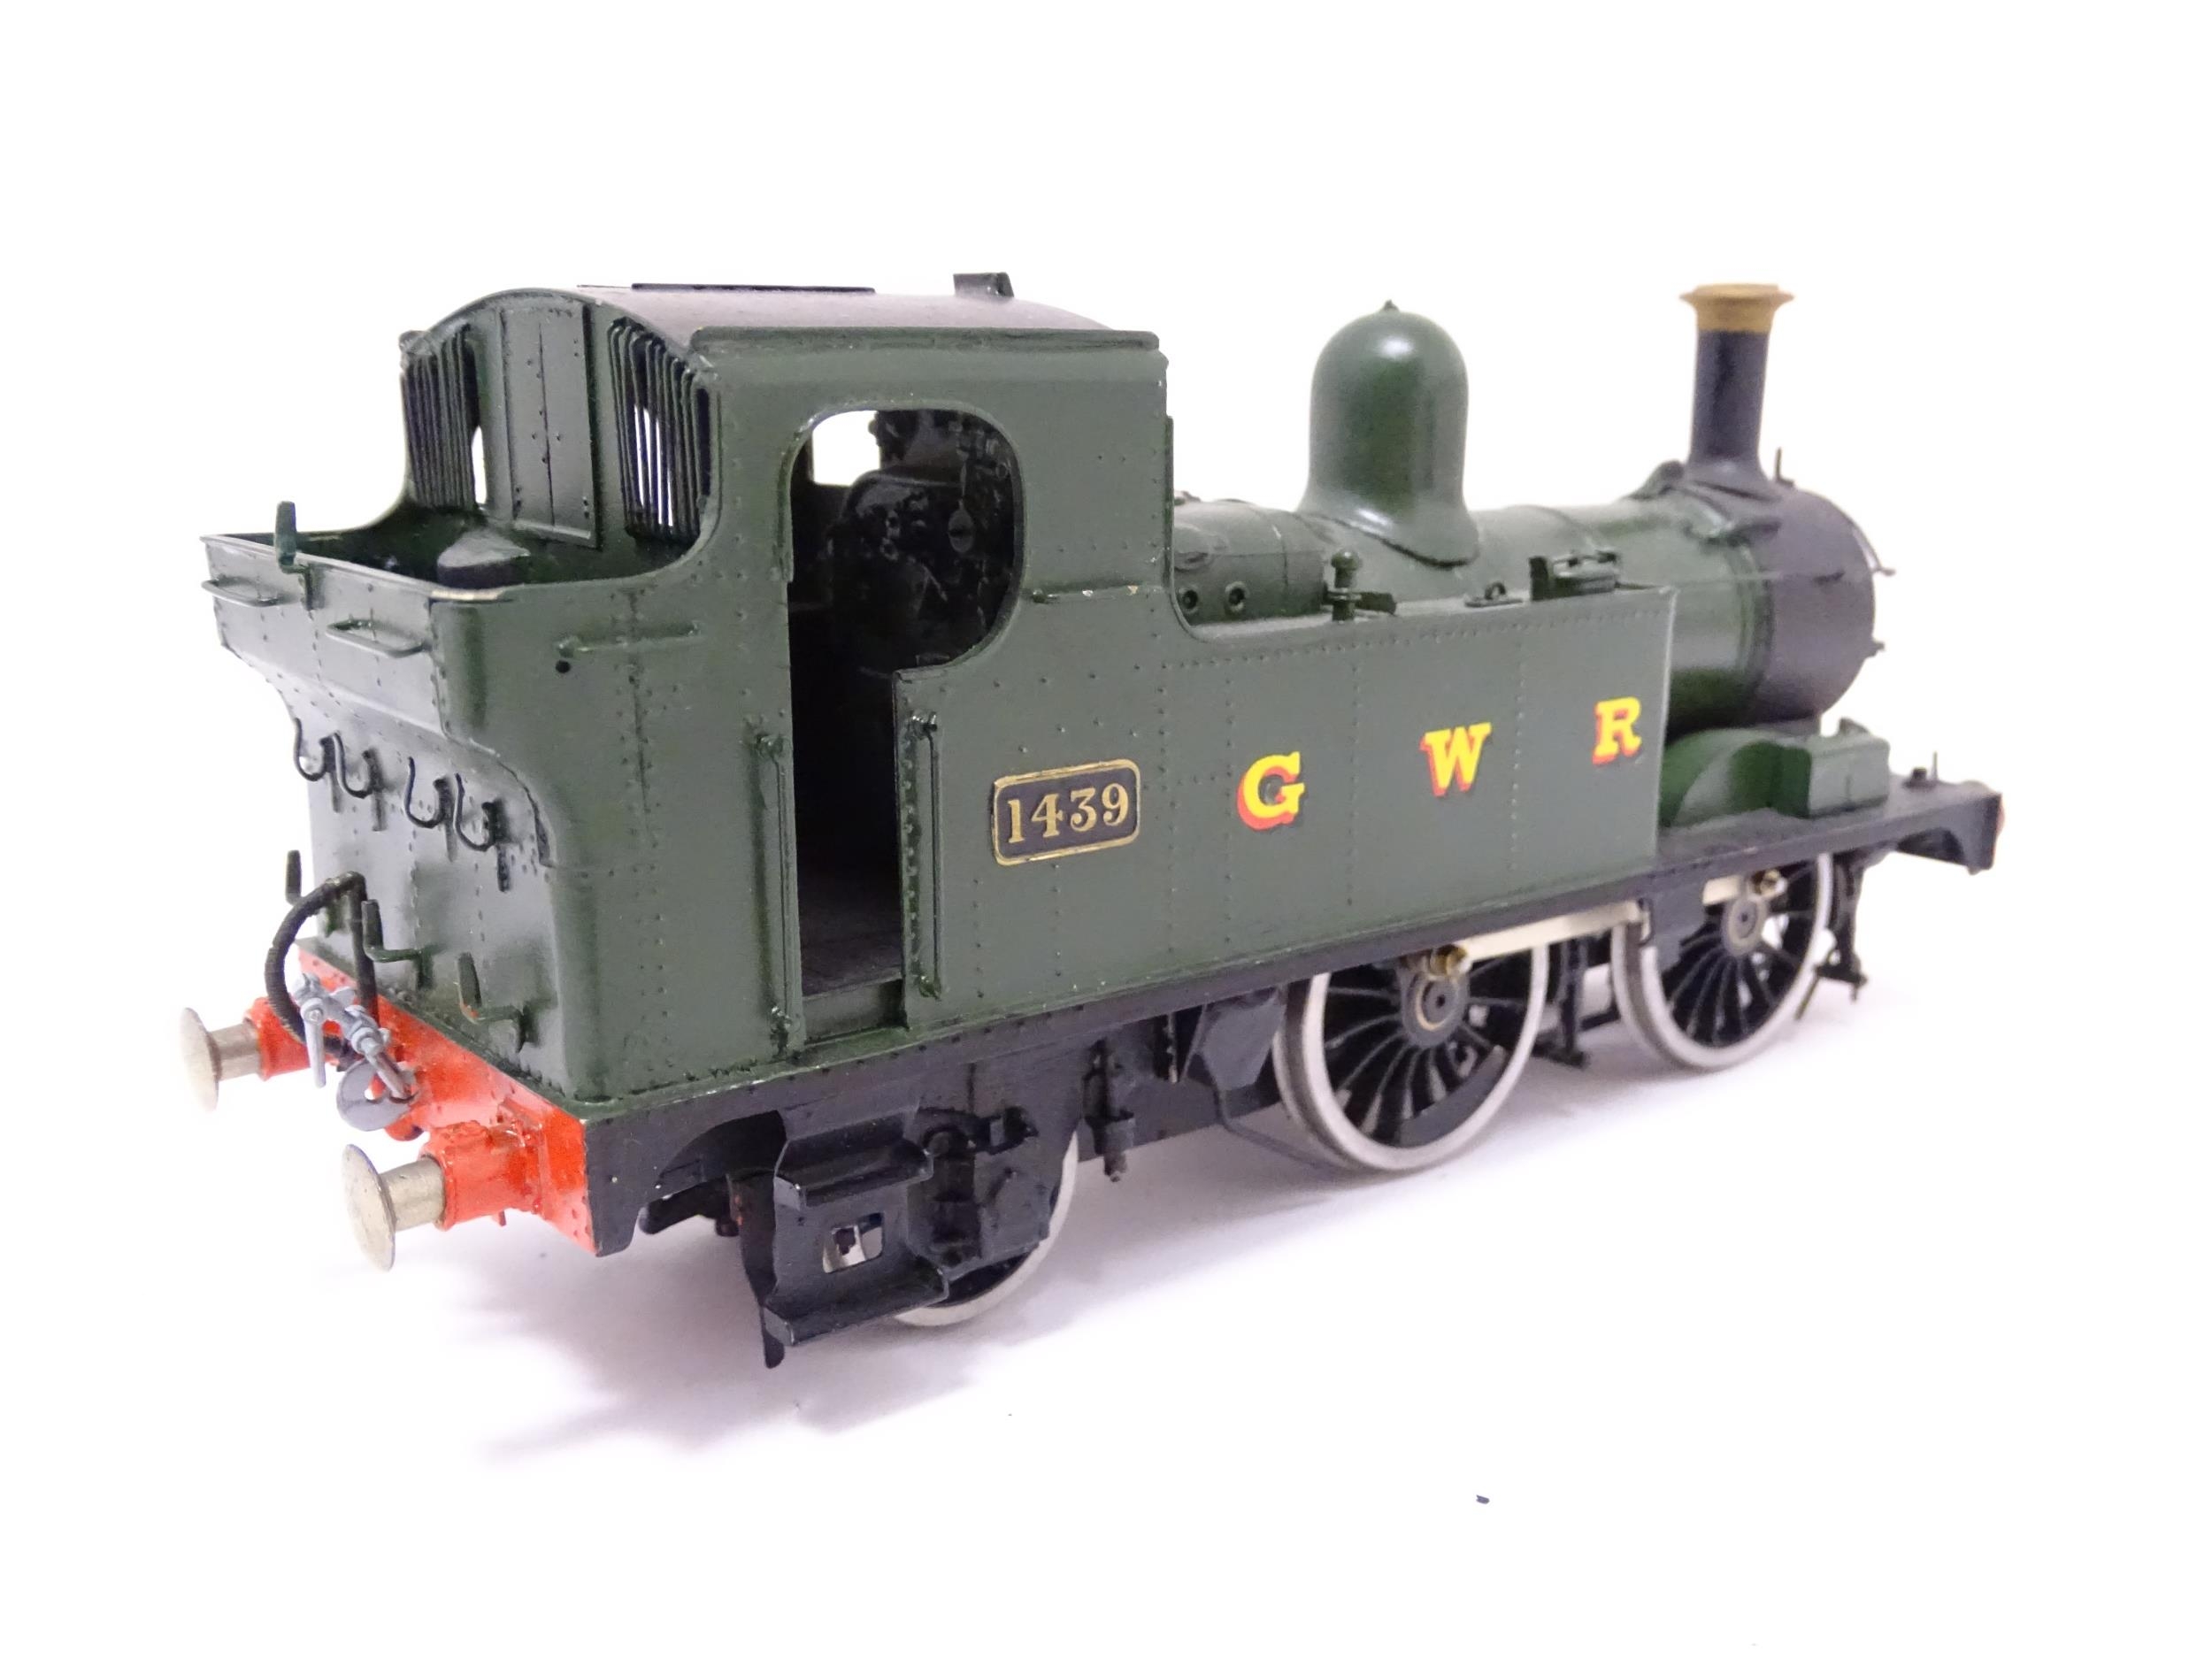 Toys - Model Train / Railway Interest : A quantity of O gauge locomotive, rolling stock / wagons, - Image 11 of 12